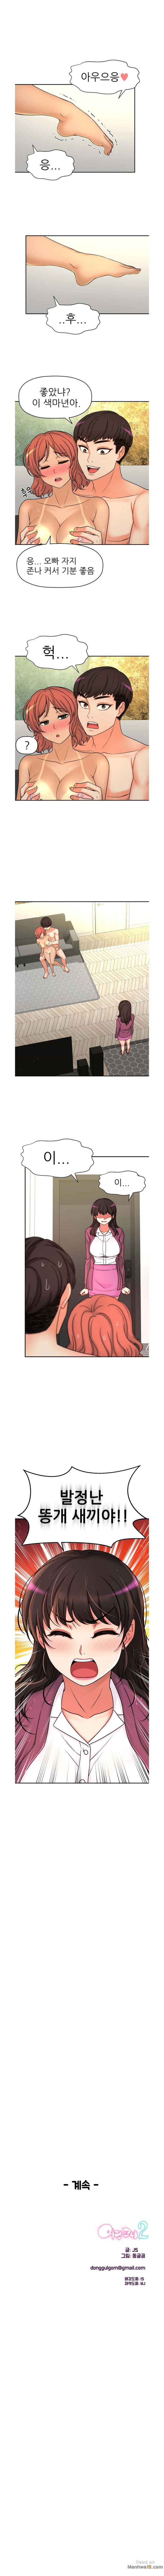 She Is Young 2 Raw - Chapter 10 Page 5